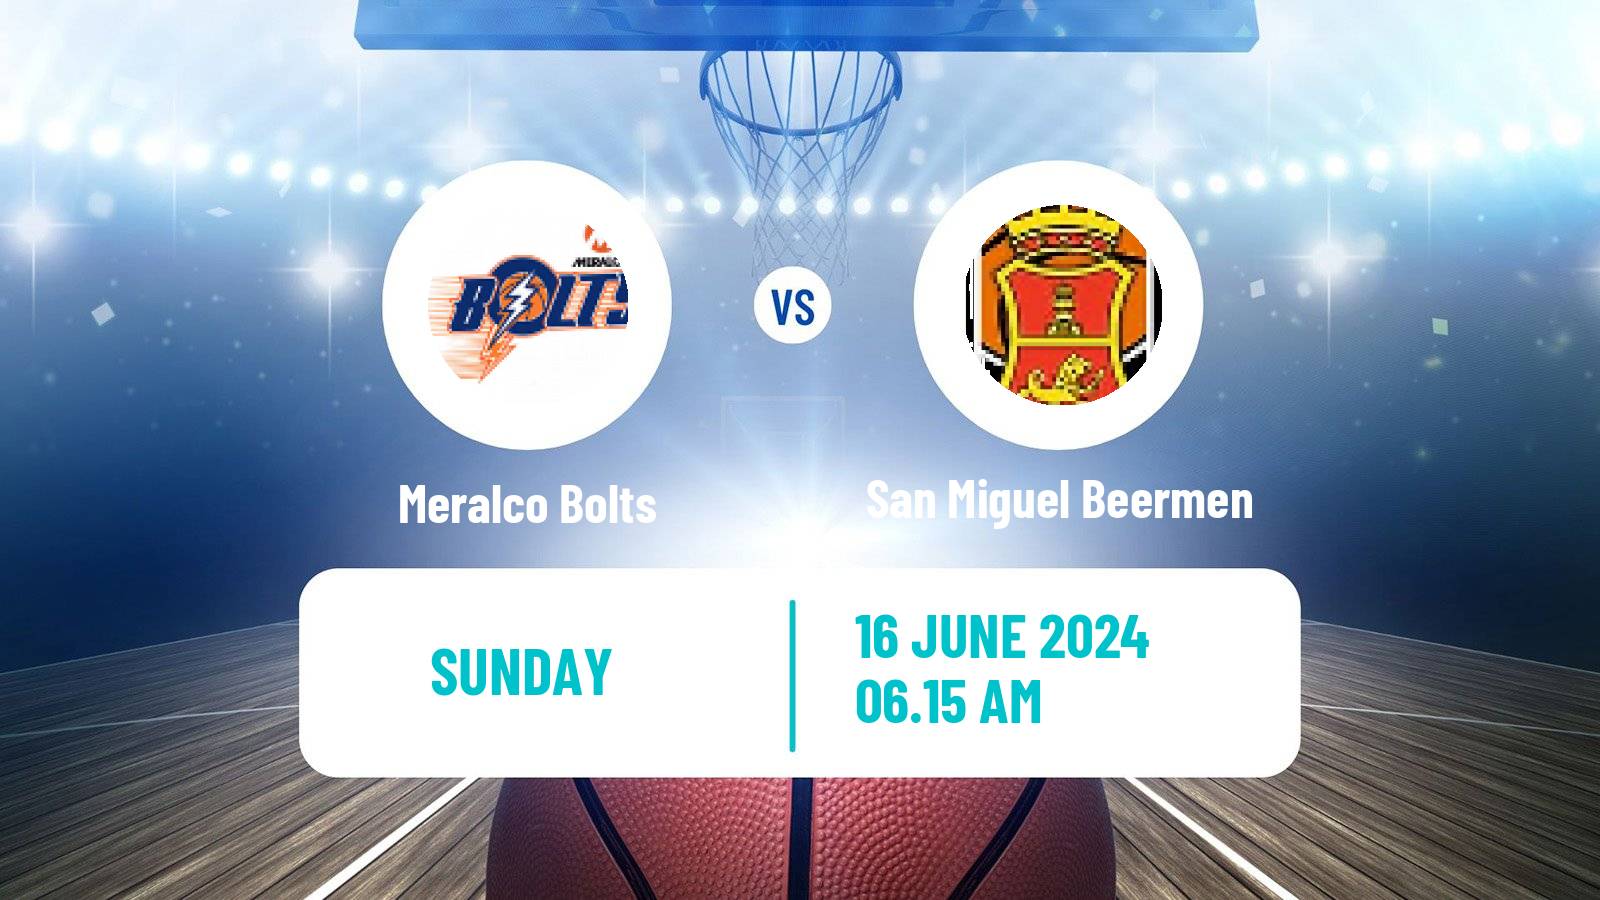 Basketball Philippines Cup Meralco Bolts - San Miguel Beermen